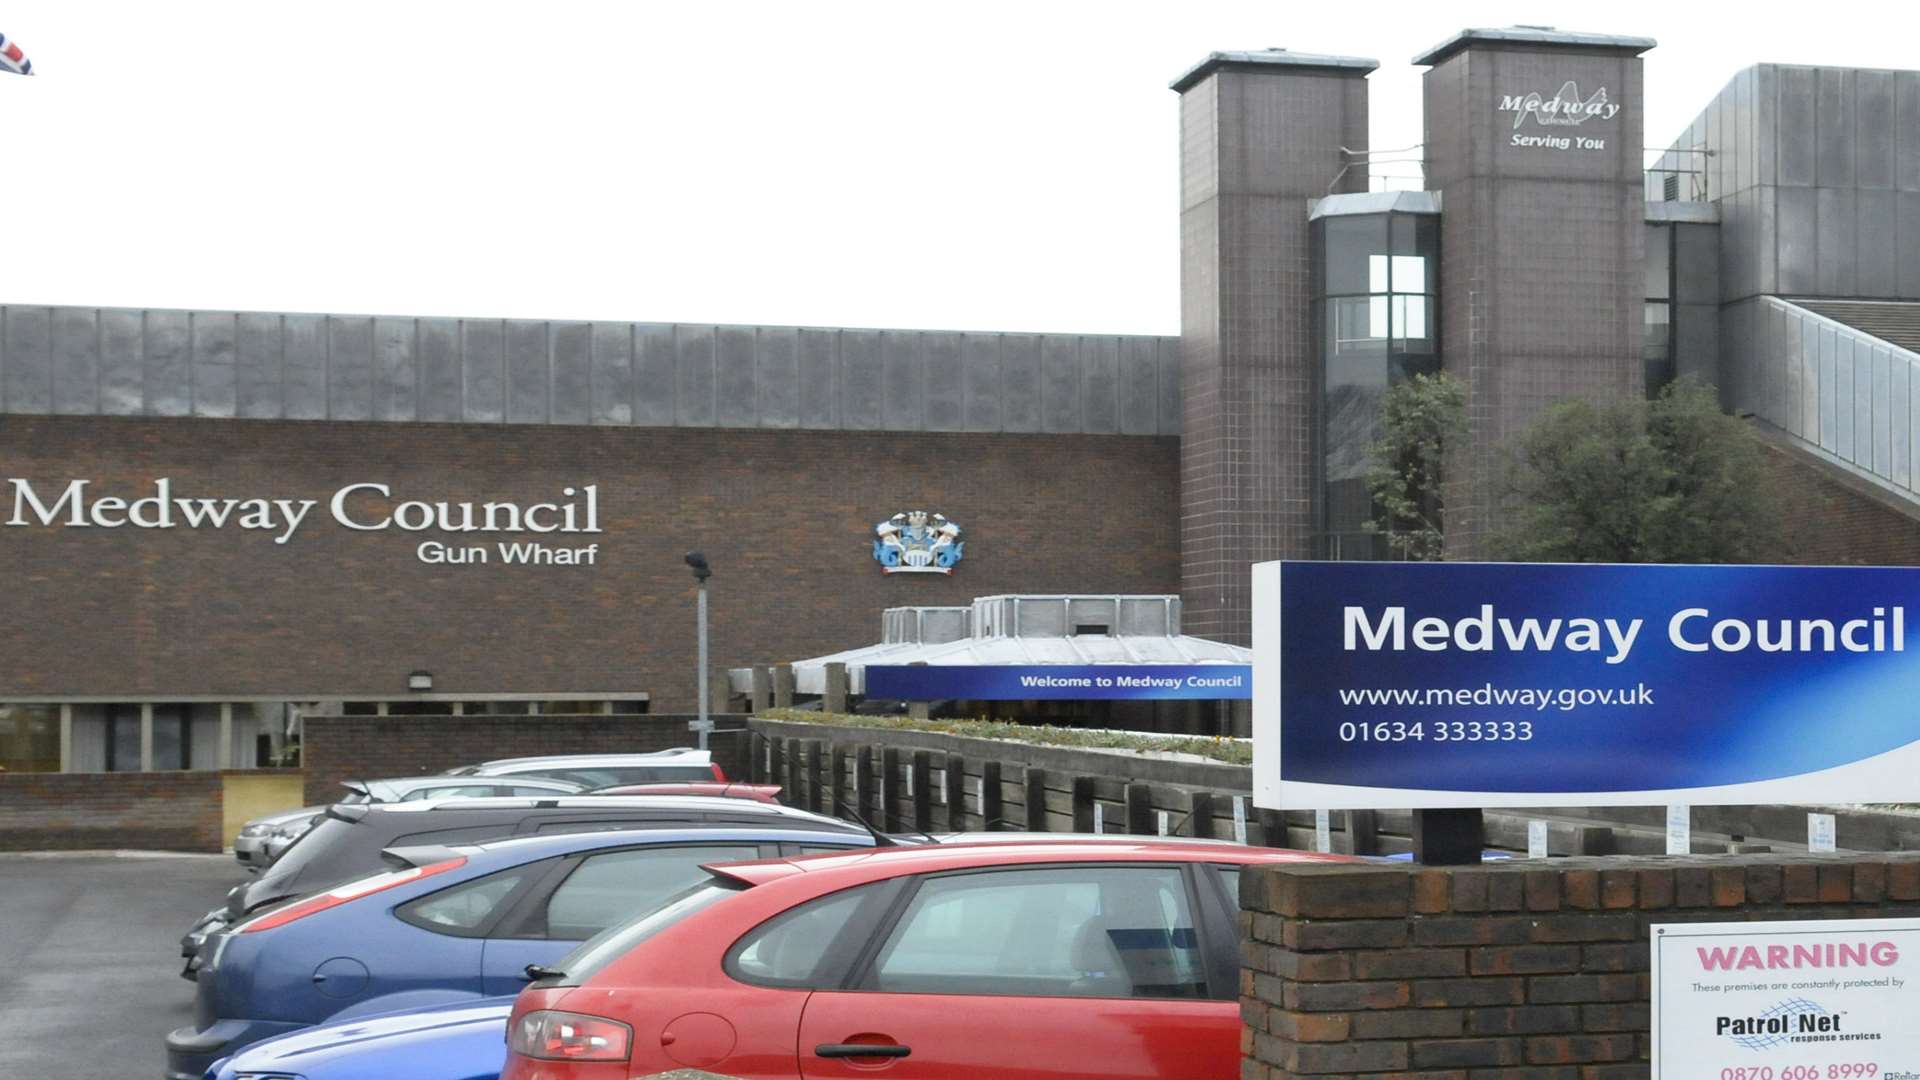 Medway Council offices at Gun Wharf in Chatham